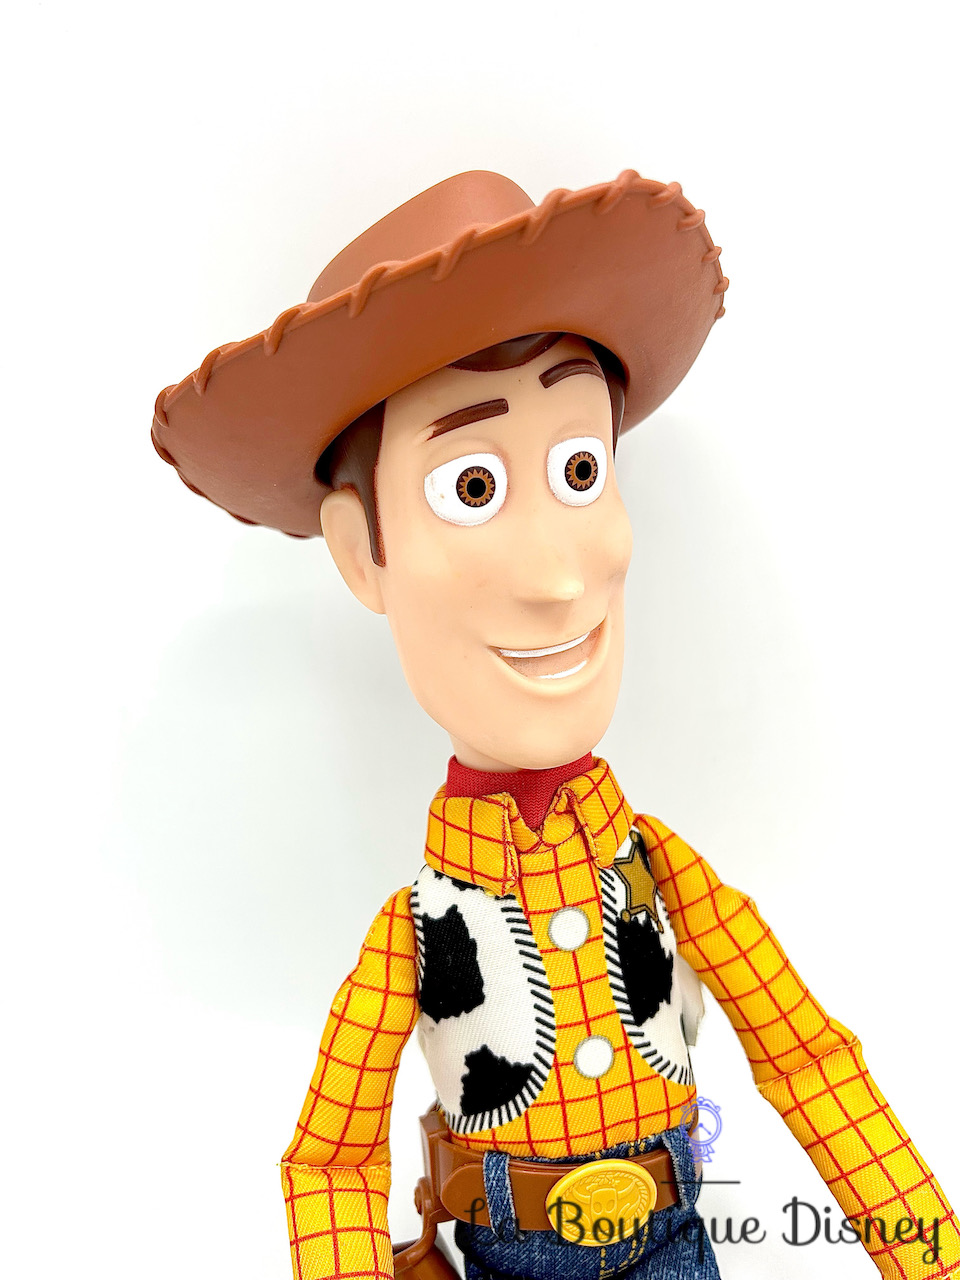 Figurine parlante Toy Story 4 - Woody